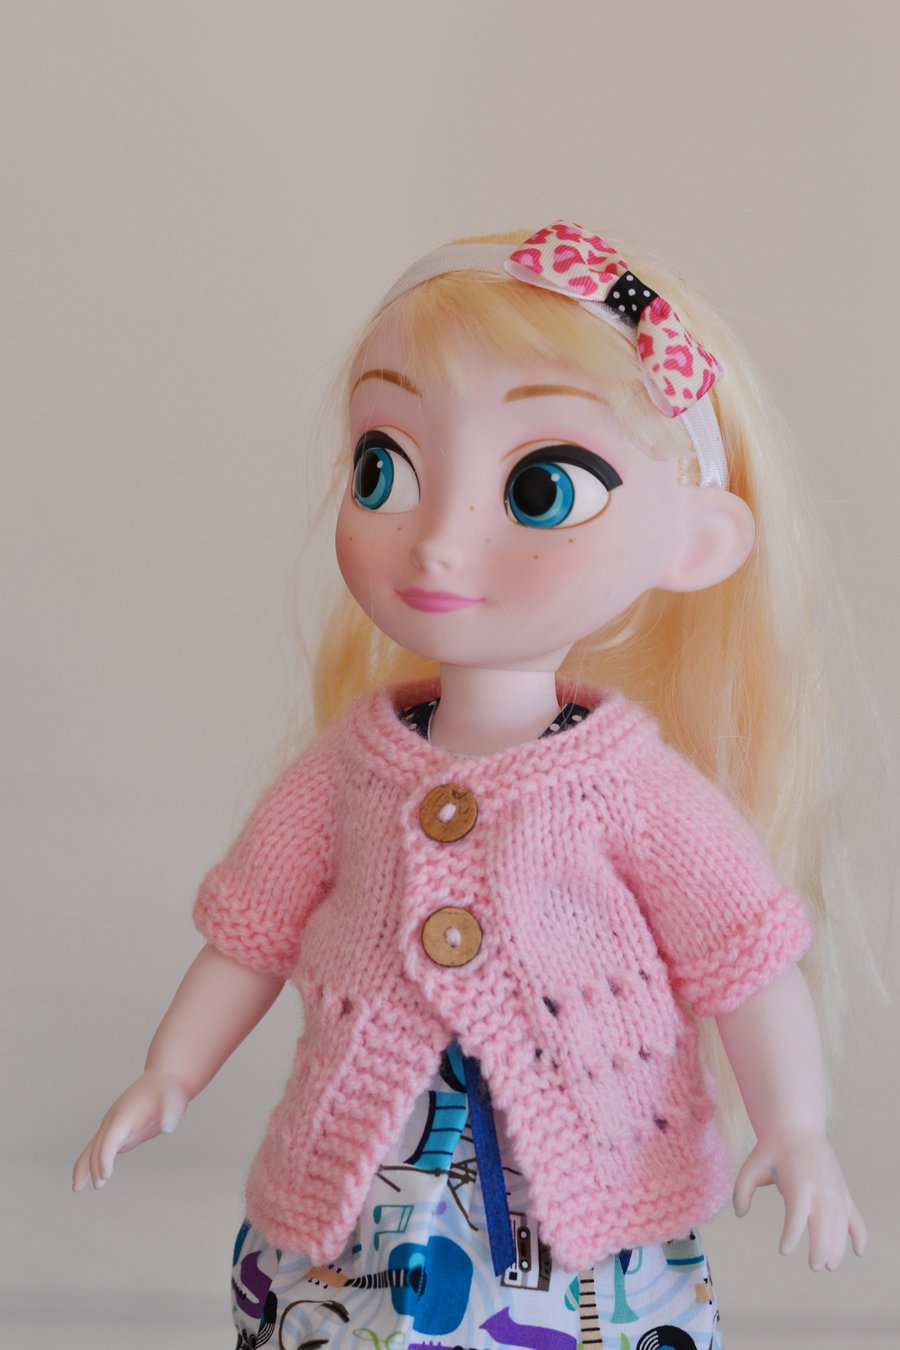 16" Dolls Pale Pink Knitted Cardigan